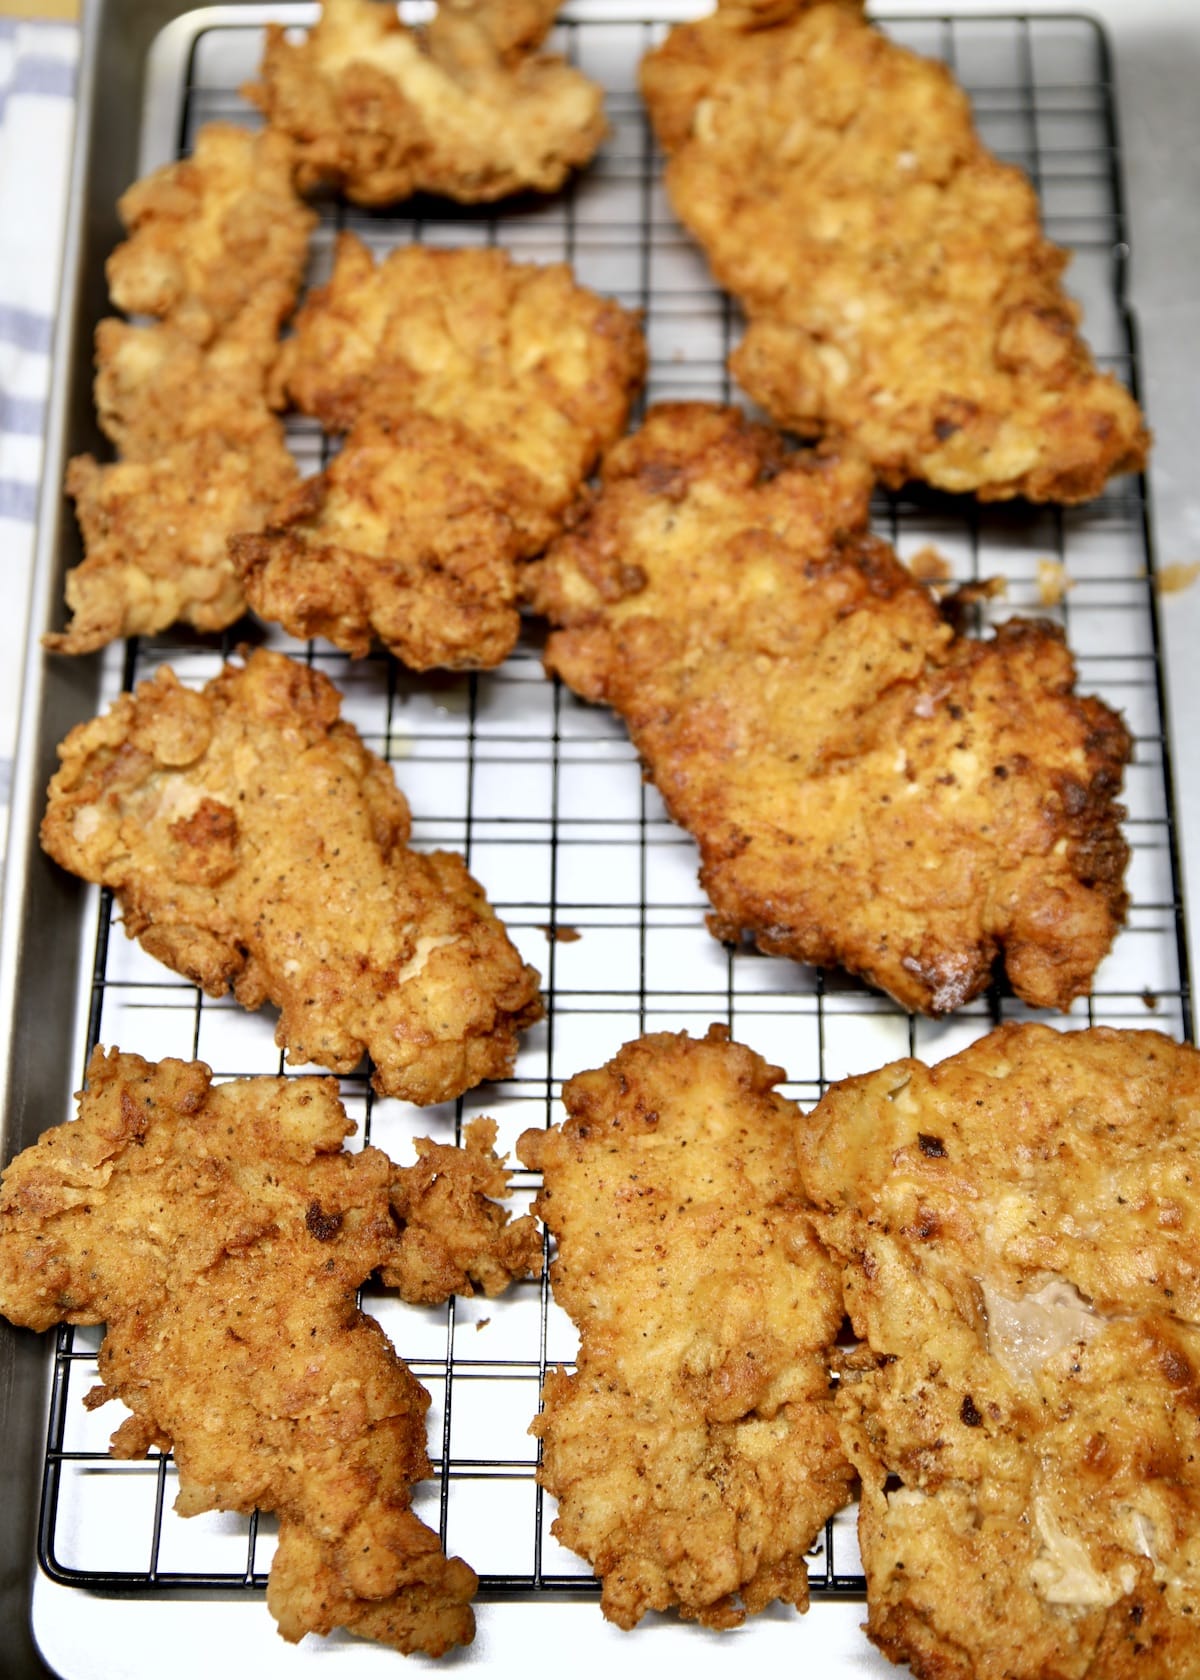 Fried chicken on a wire rack lined pan.